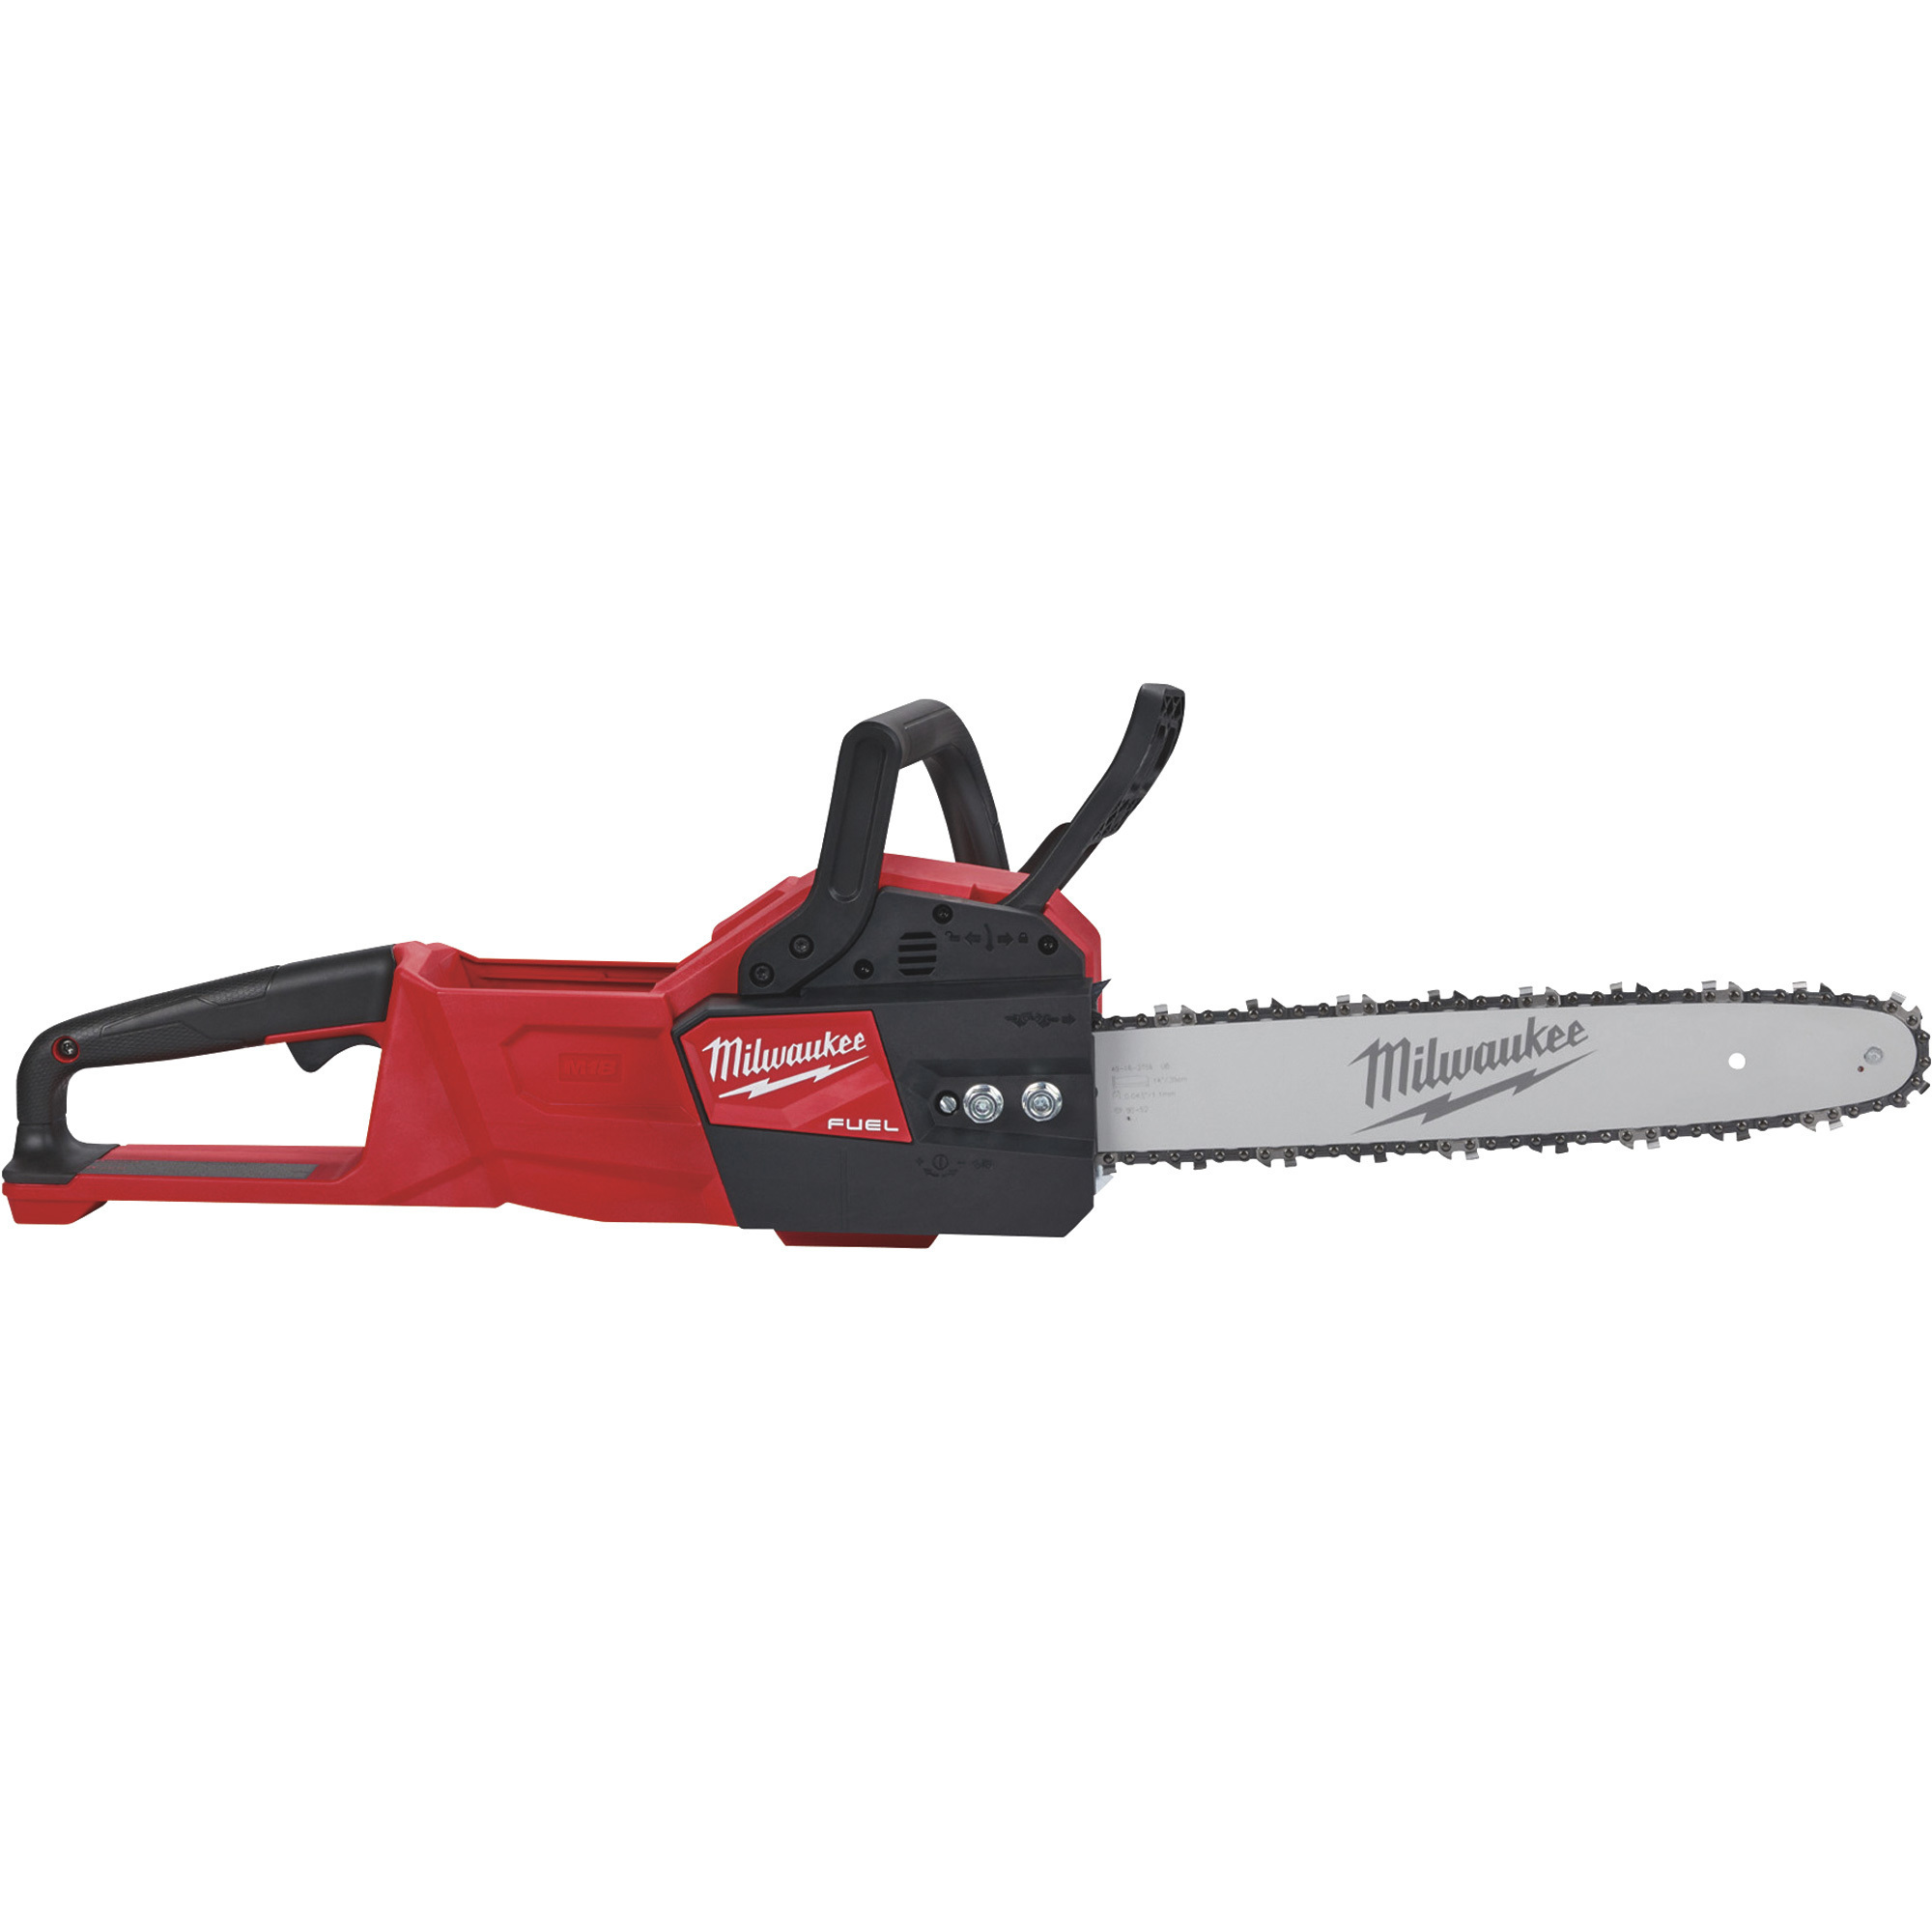 18V M18 Fuel Lithium-Ion Cordless Chainsaw Bare Tool — 16Inch Bar, Model - Milwaukee 2727-20